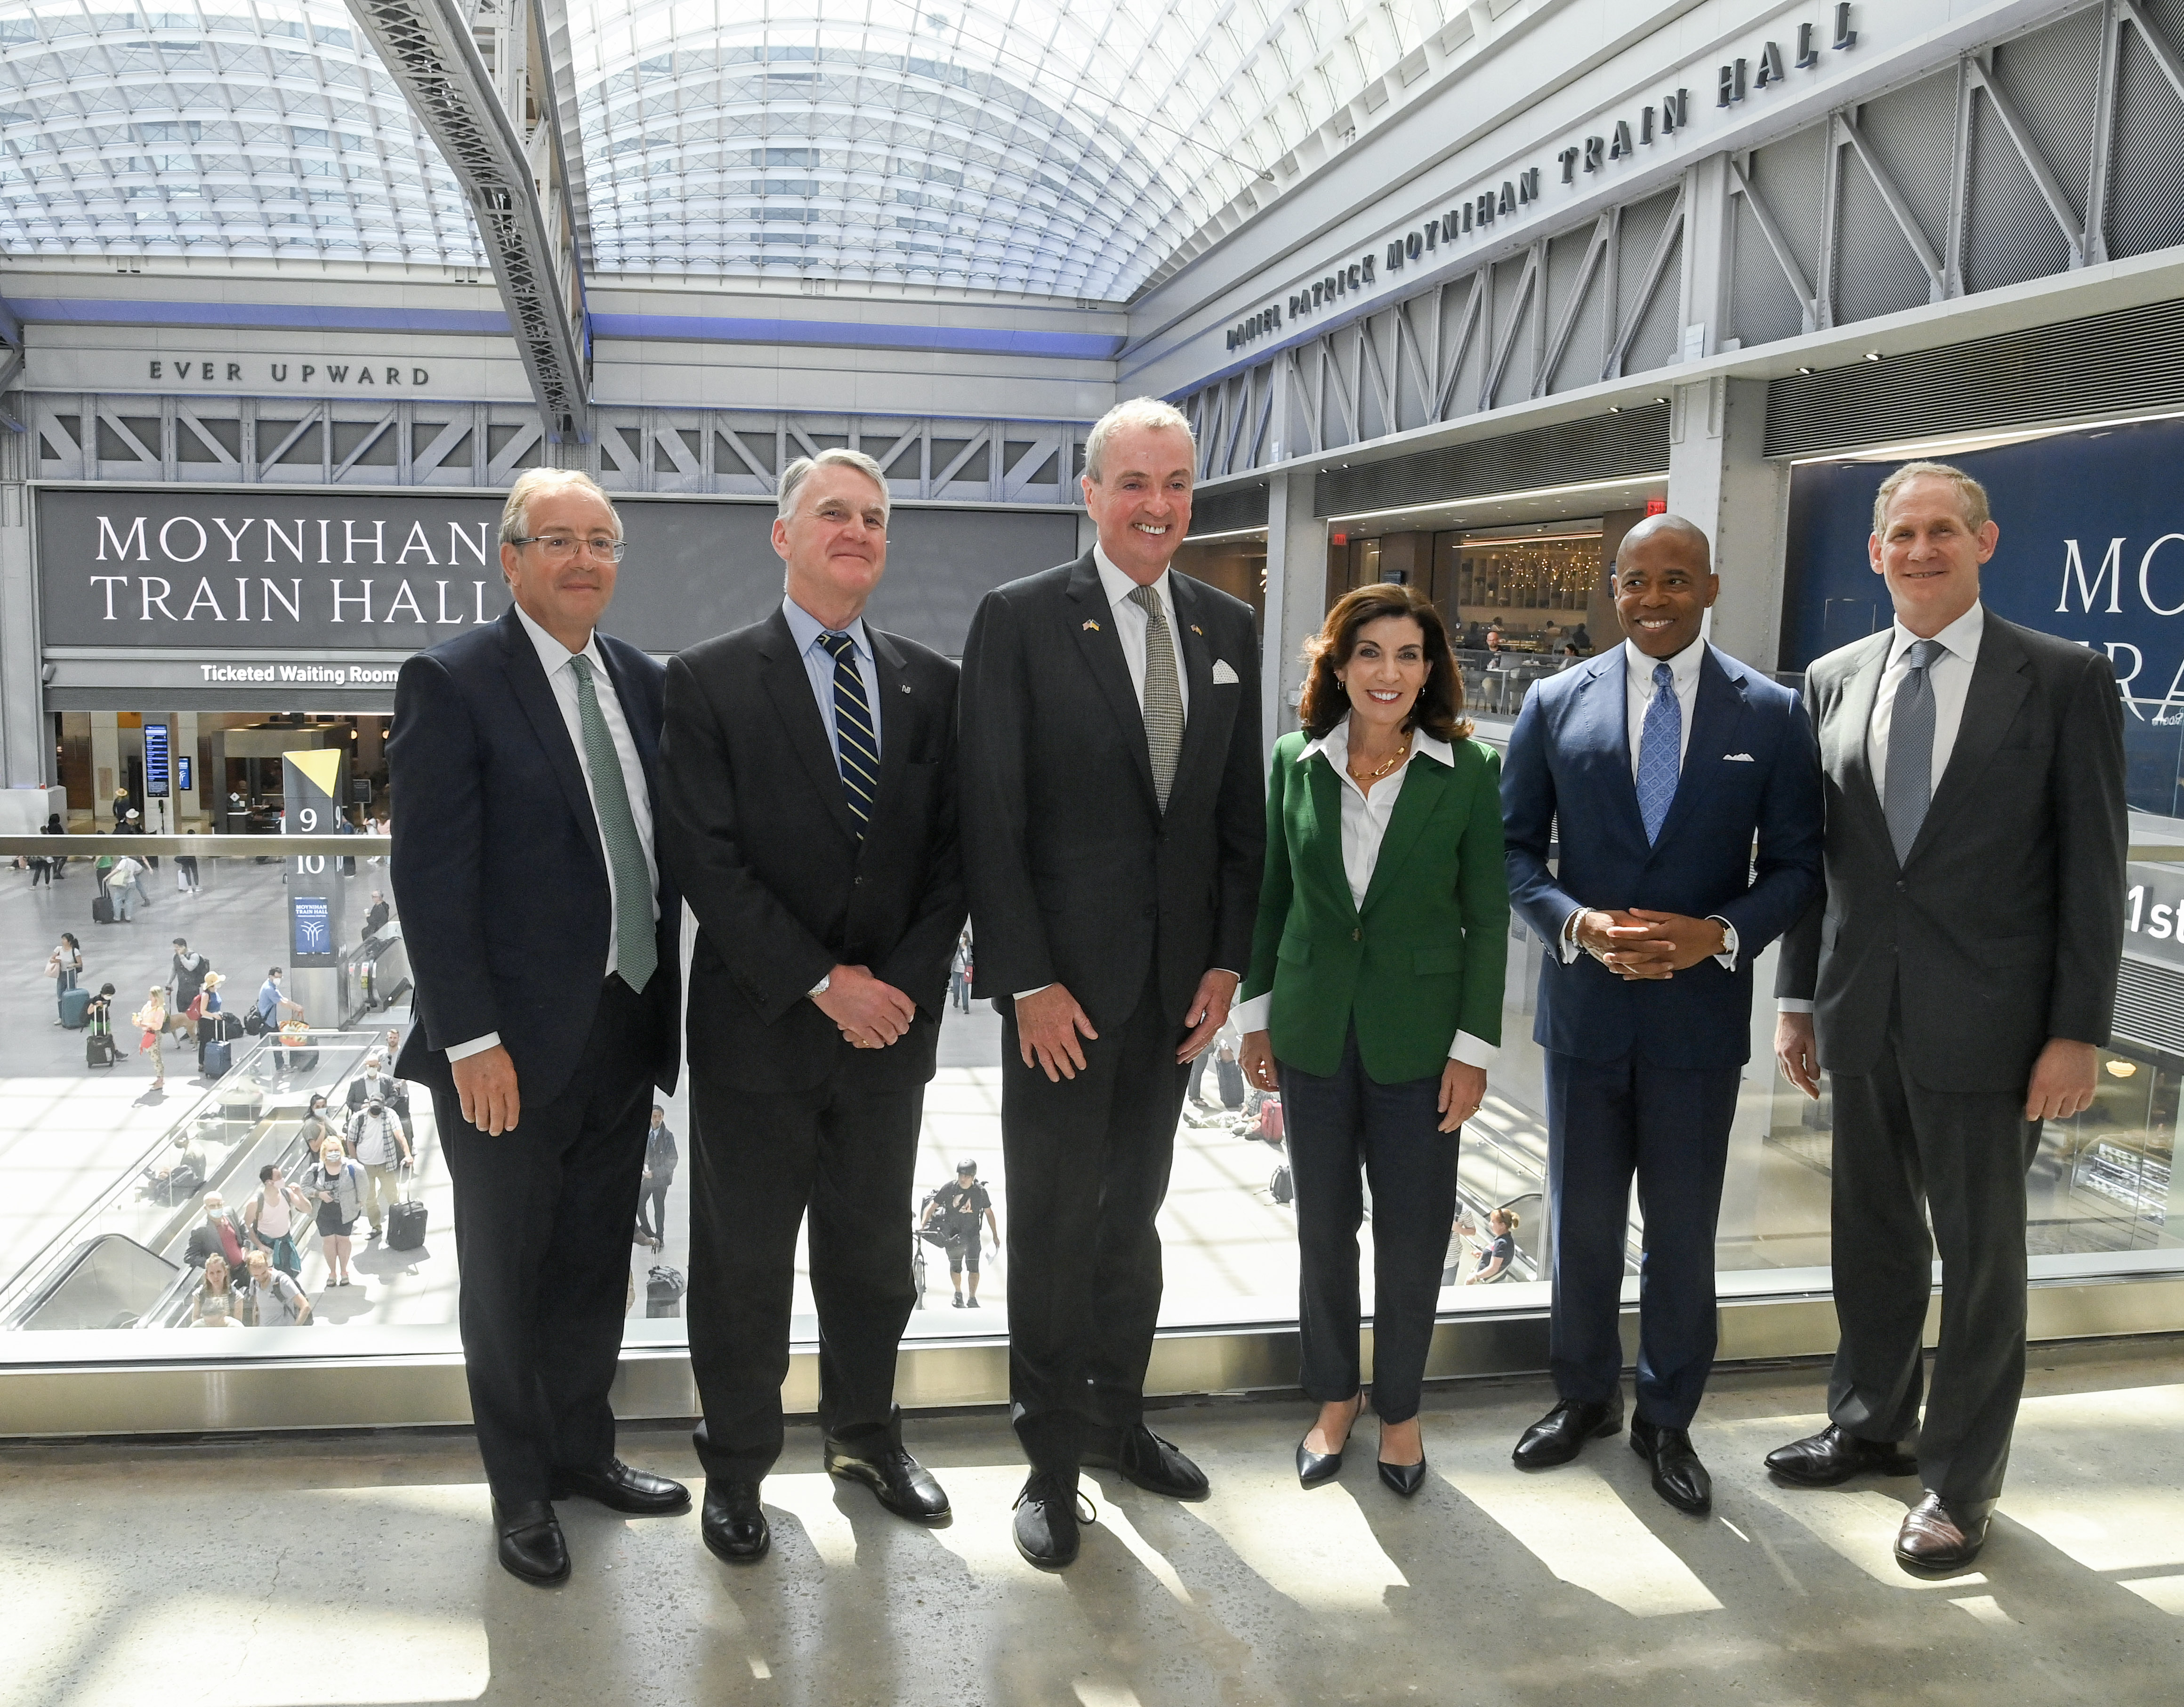 ICYMI: Governor Hochul and Governor Murphy Announce Major Step Toward Modernization of Penn Station